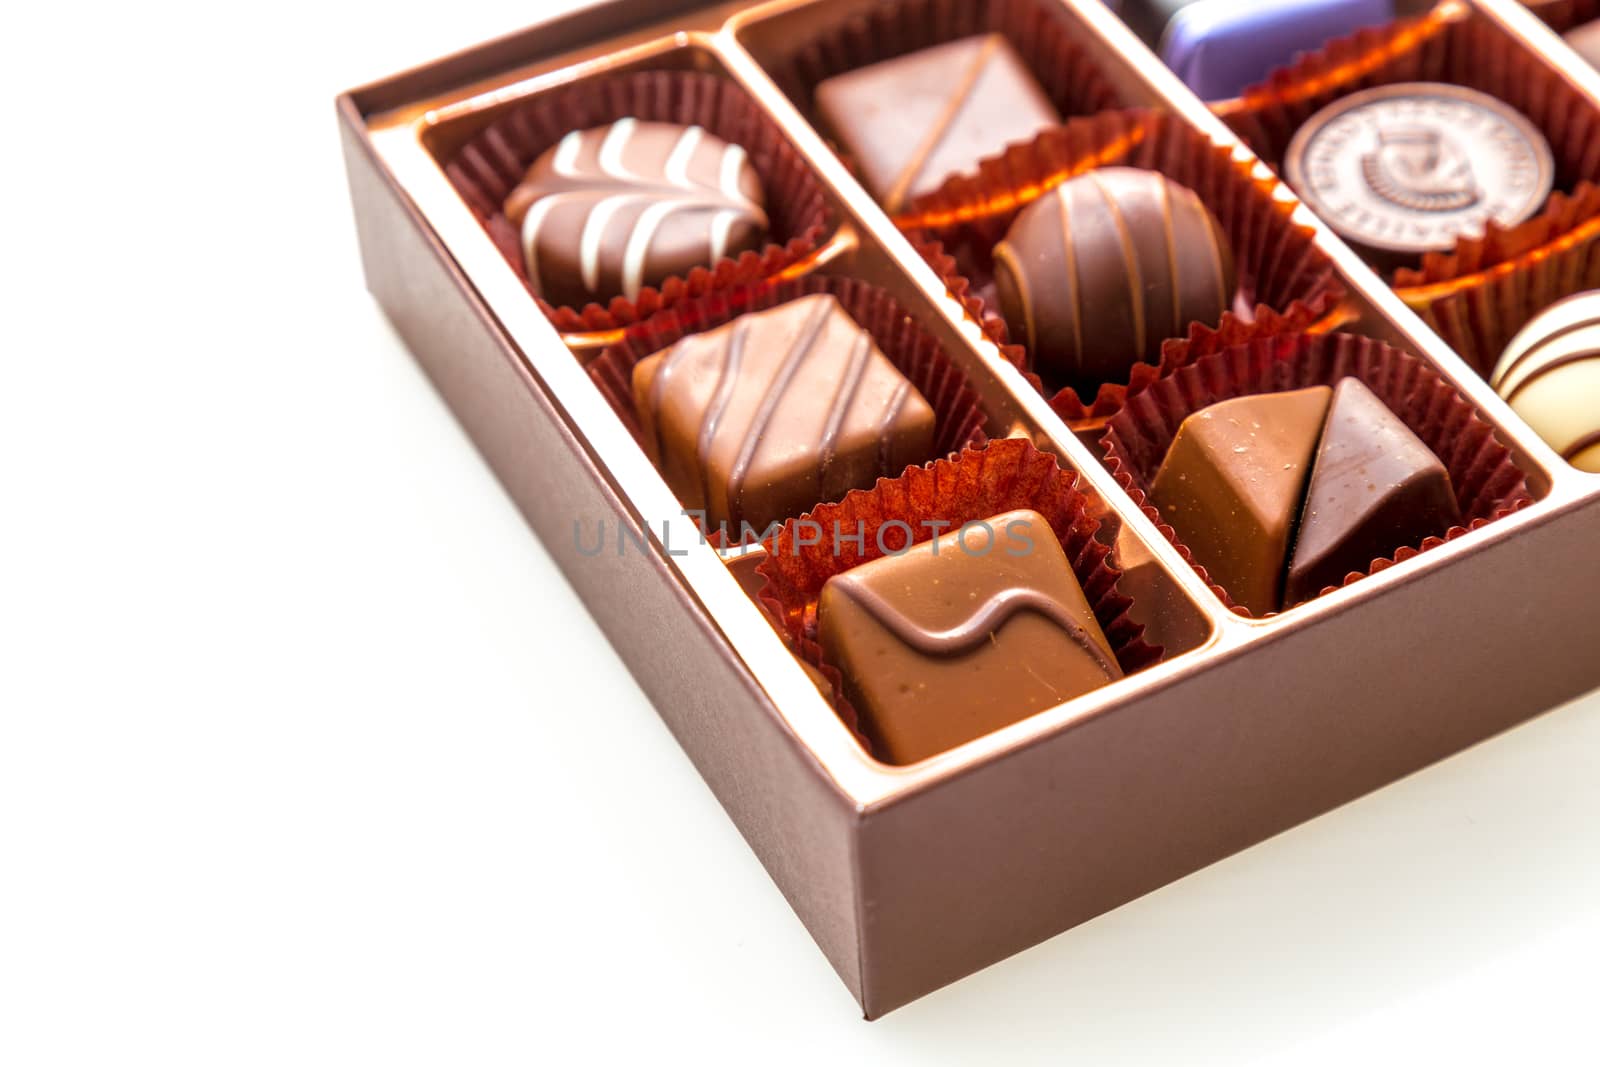 Assorted chocolates in brown box, with red heart chocolate